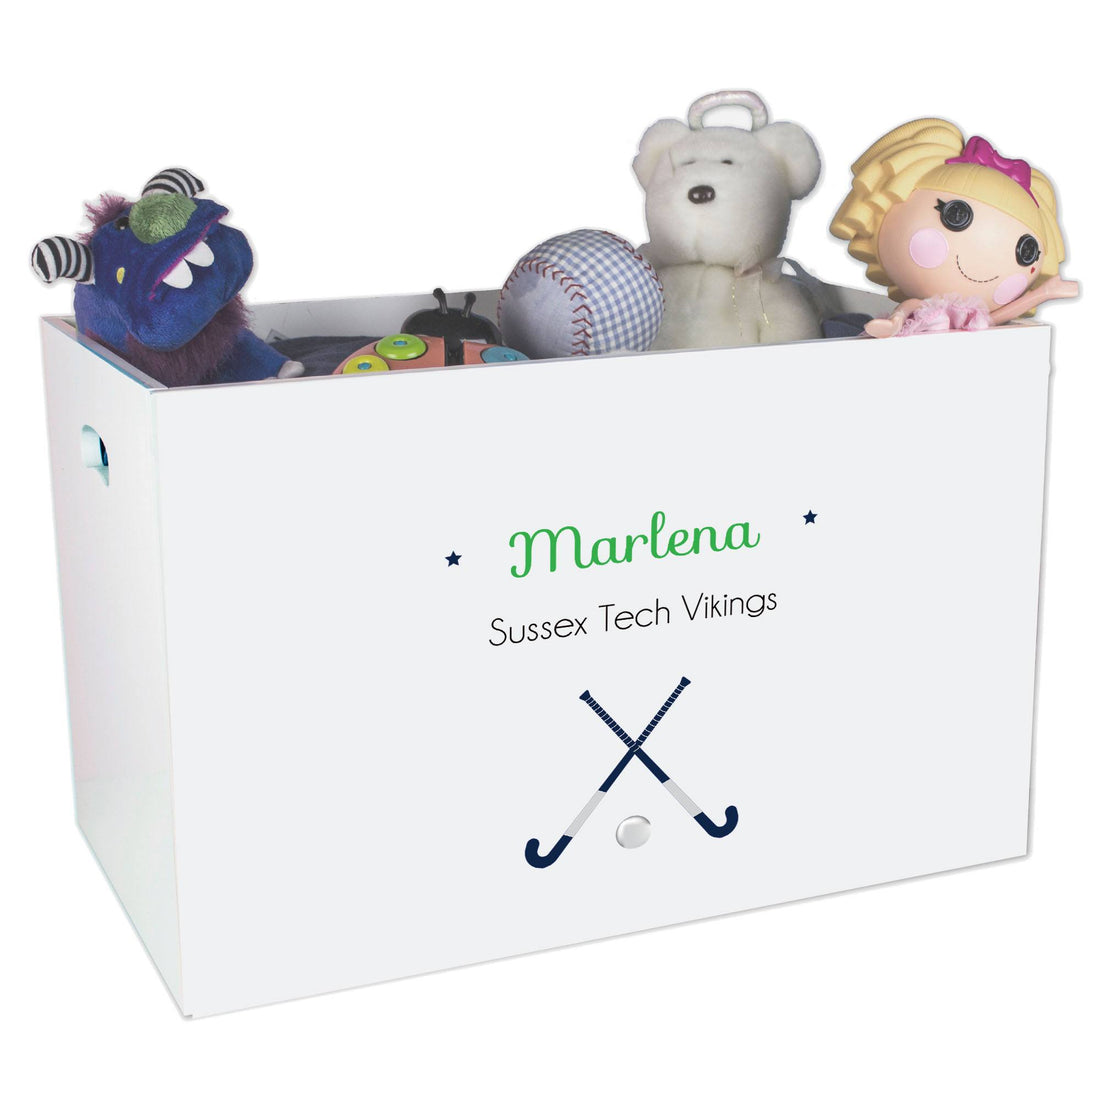 Open White Toy Box Bench with Field Hockey design